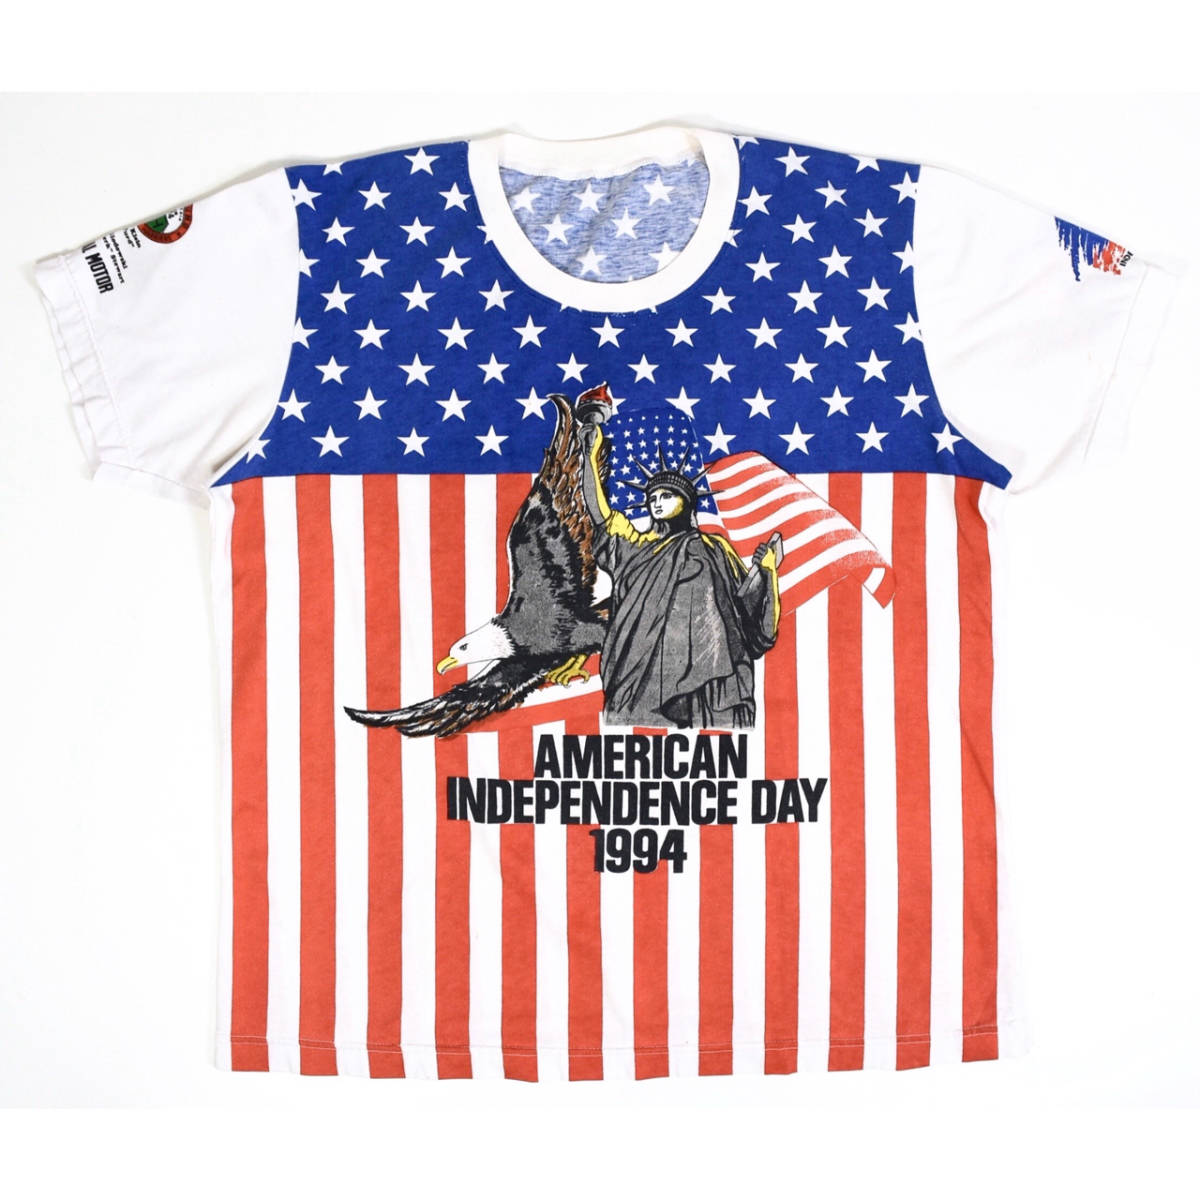 1994 AMERICAN INDEPENDENCE DAY Tee XL 90s アメリカ独立記念日 インディペンデンスデイ 総柄プリント Tシャツ  USA ヴィンテージ 星条旗